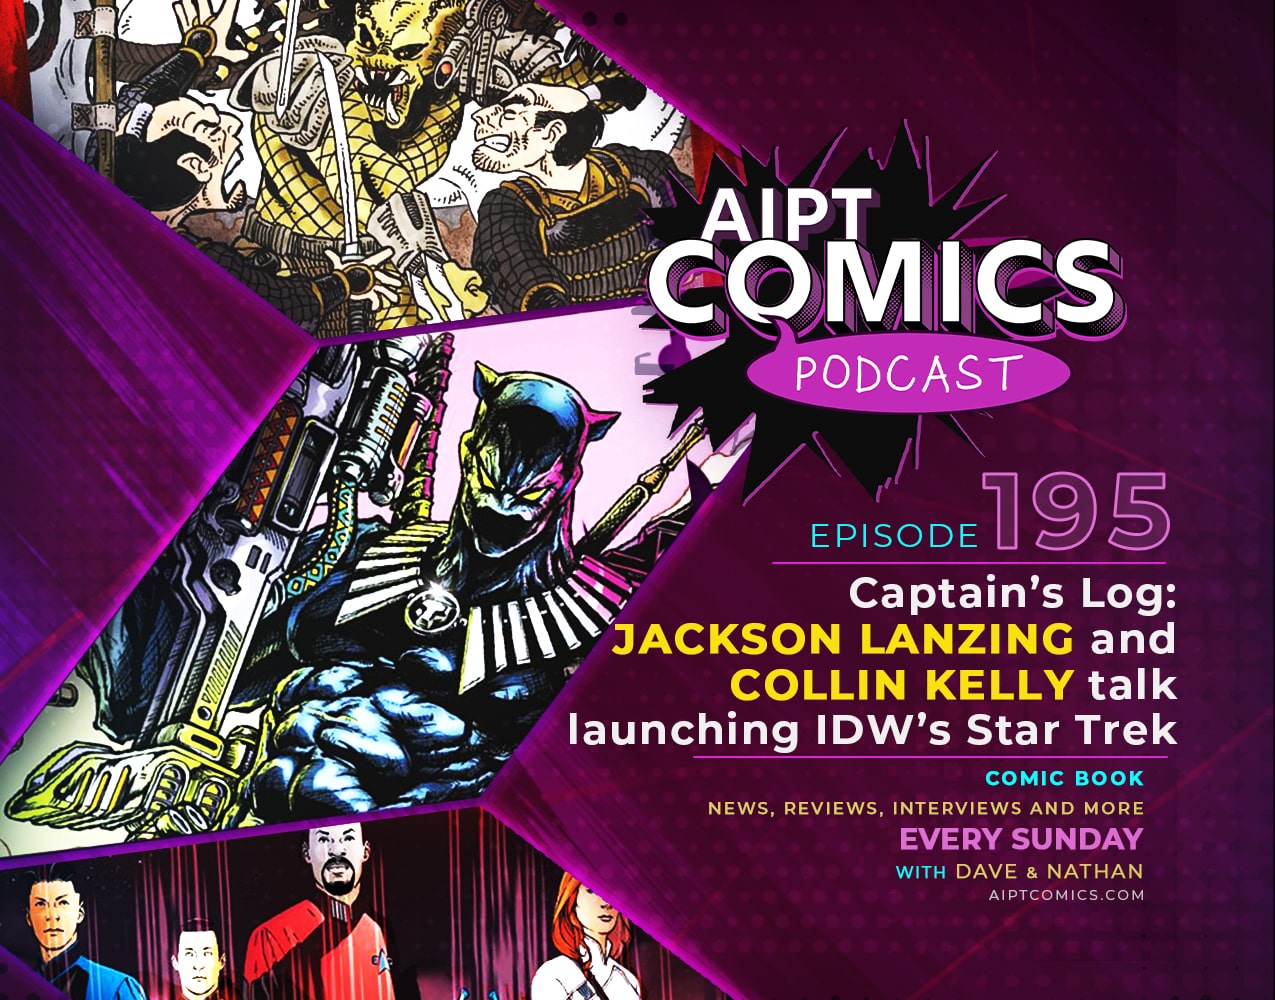 AIPT Comics Podcast Episode 195: Captain’s Log: Jackson Lanzing and Collin Kelly talk launching IDW’s ‘Star Trek’